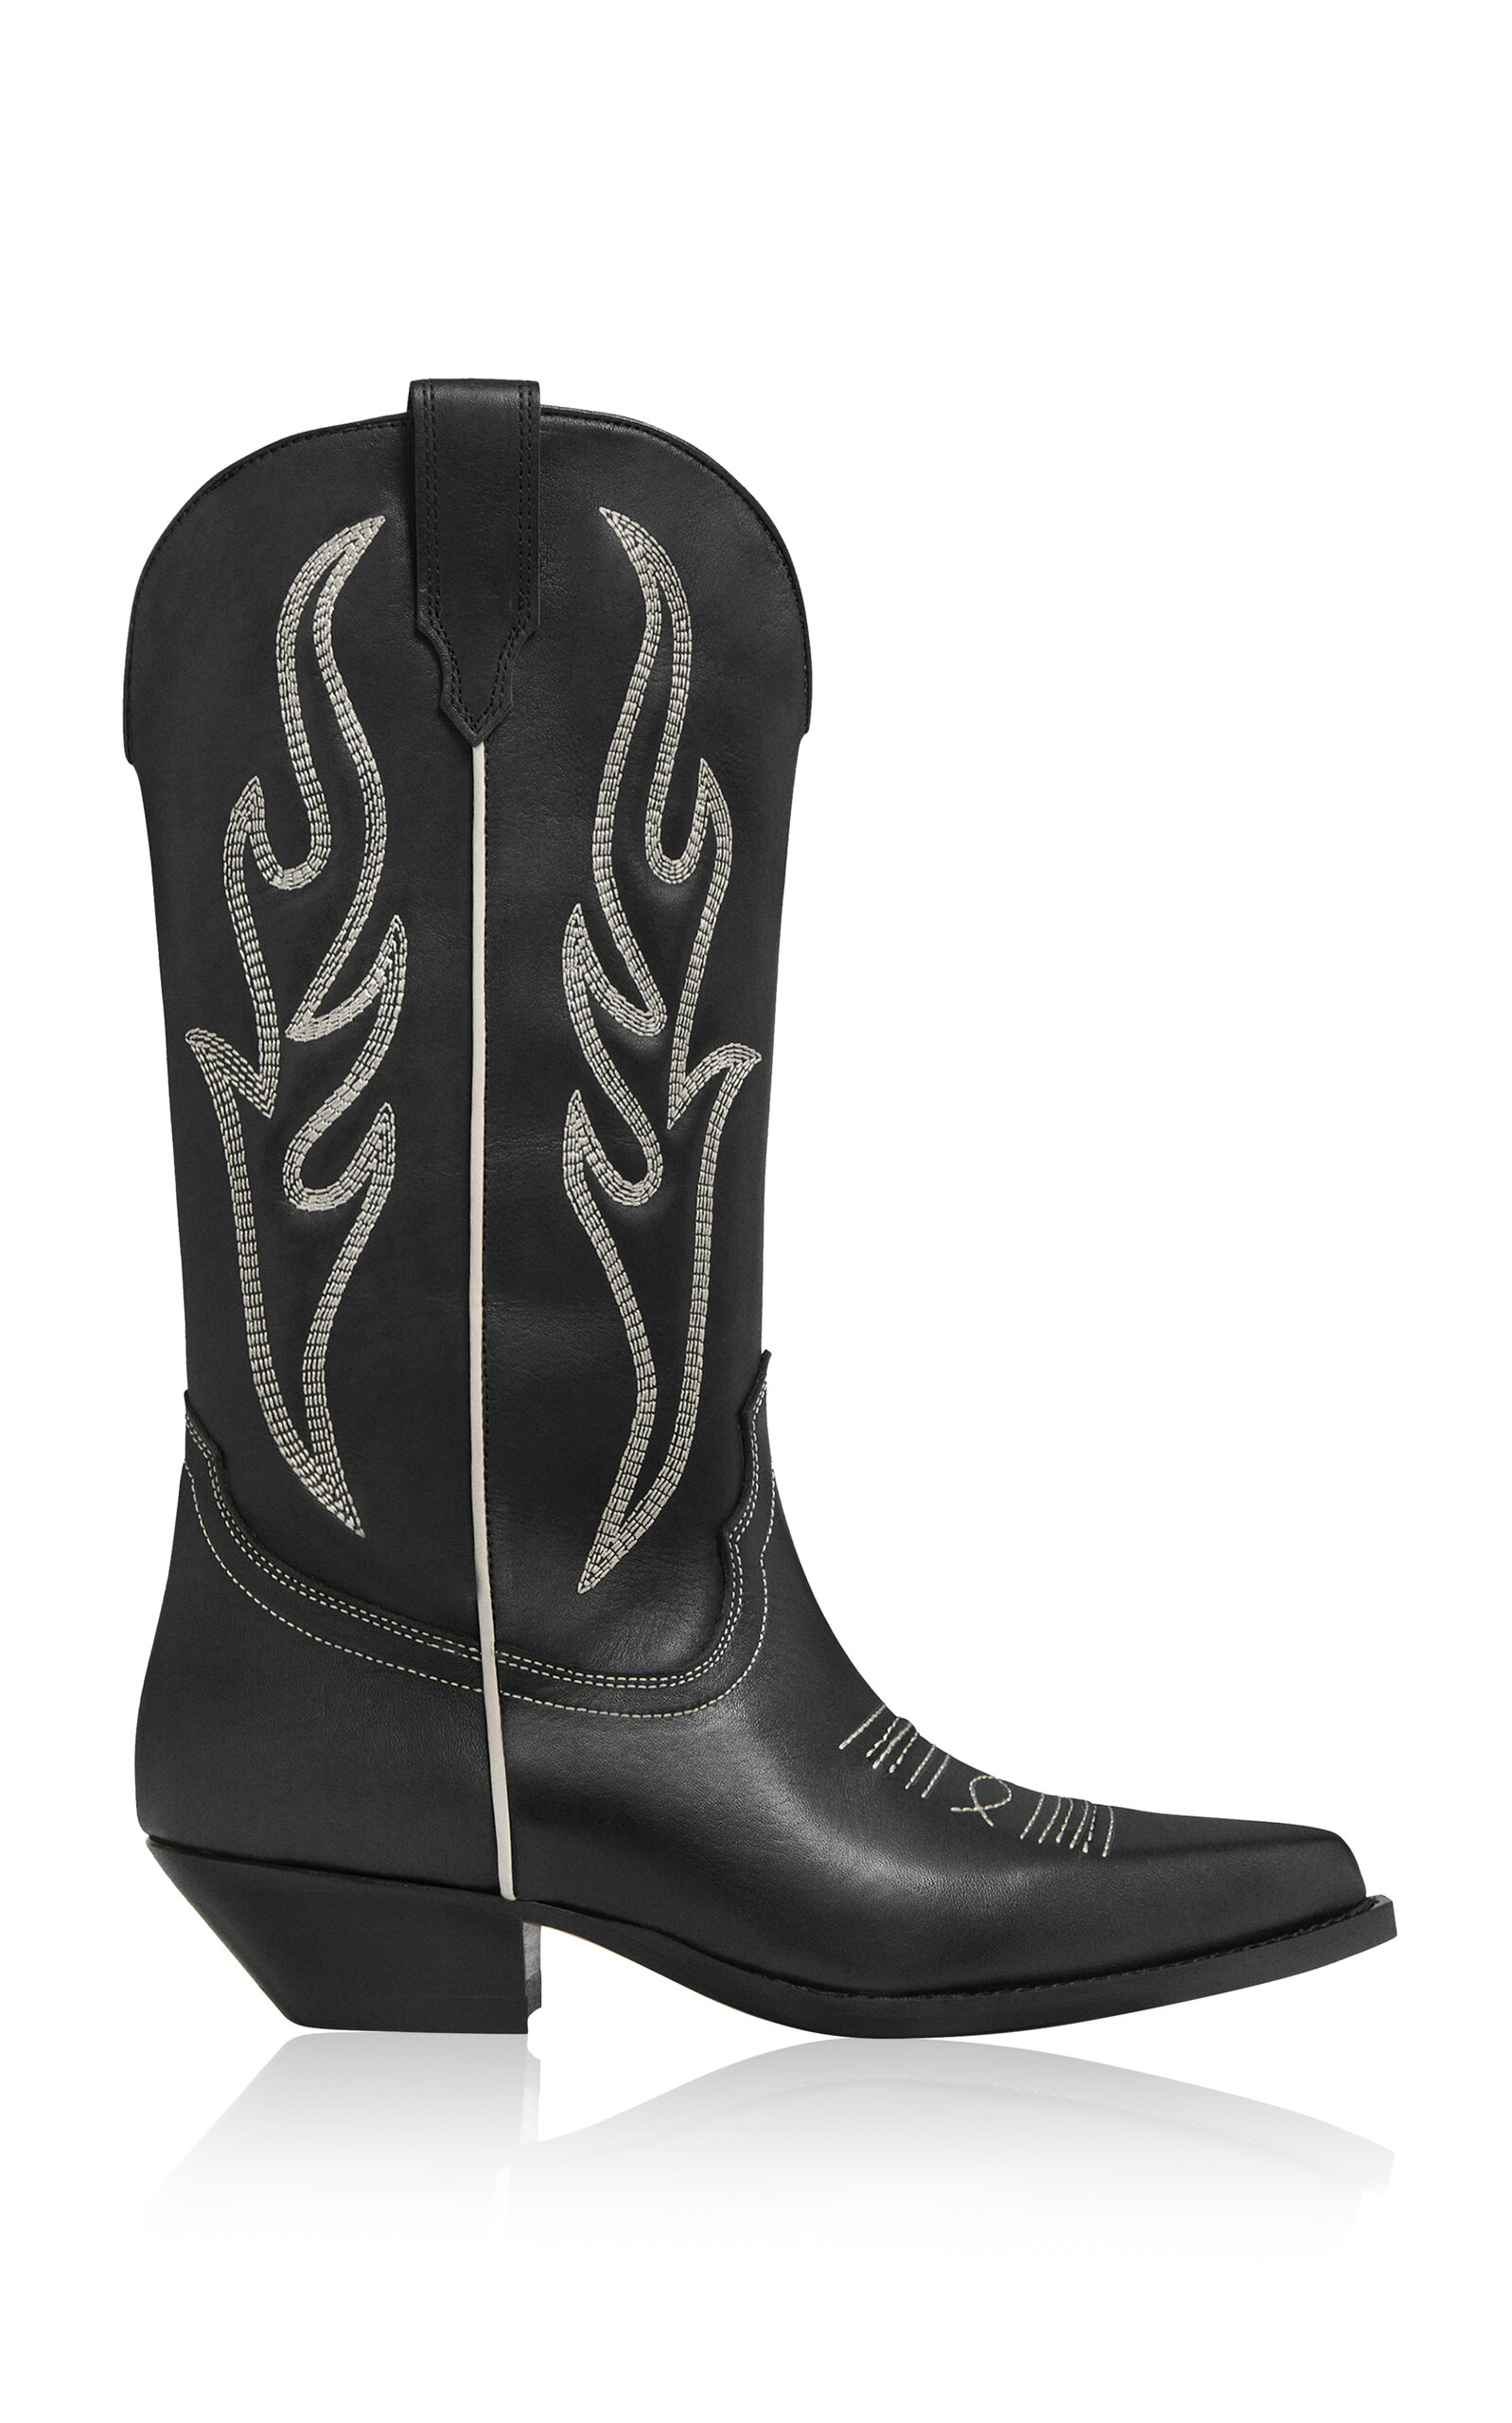 Santa Fe Embroidered Leather Western Boots